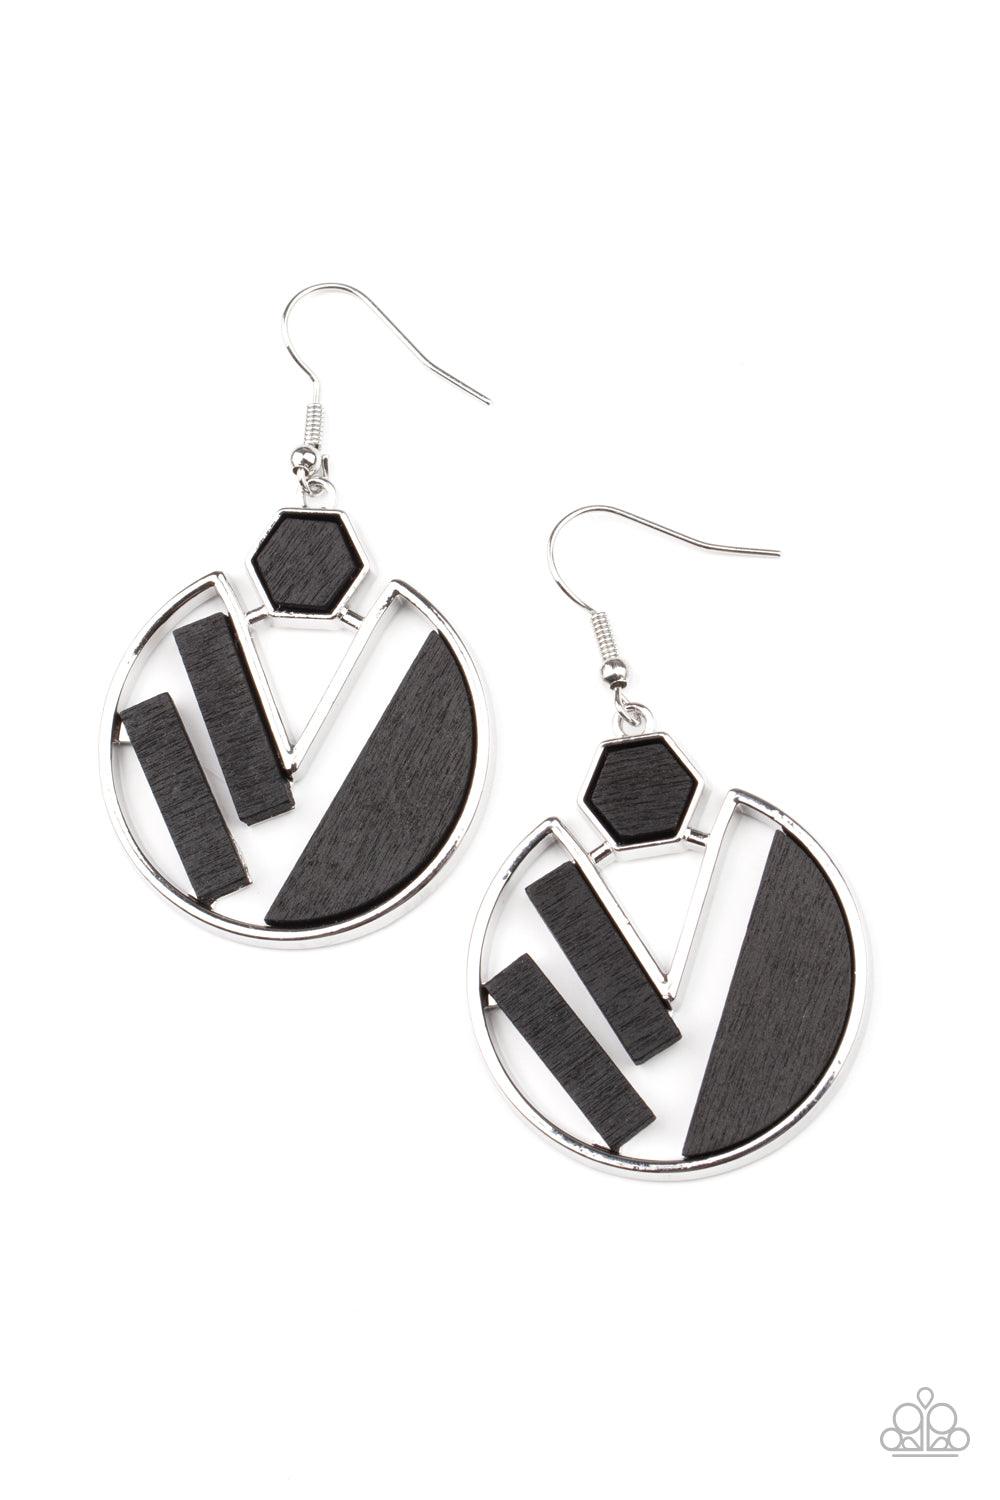 Paparazzi Accessories Petrified Posh - Black Painted in a black finish, flat wooden frames collect inside a geometric sliver fitting for a trendy fashion. Earring attaches to a standard fishhook fitting. Sold as one pair of earrings. Jewelry